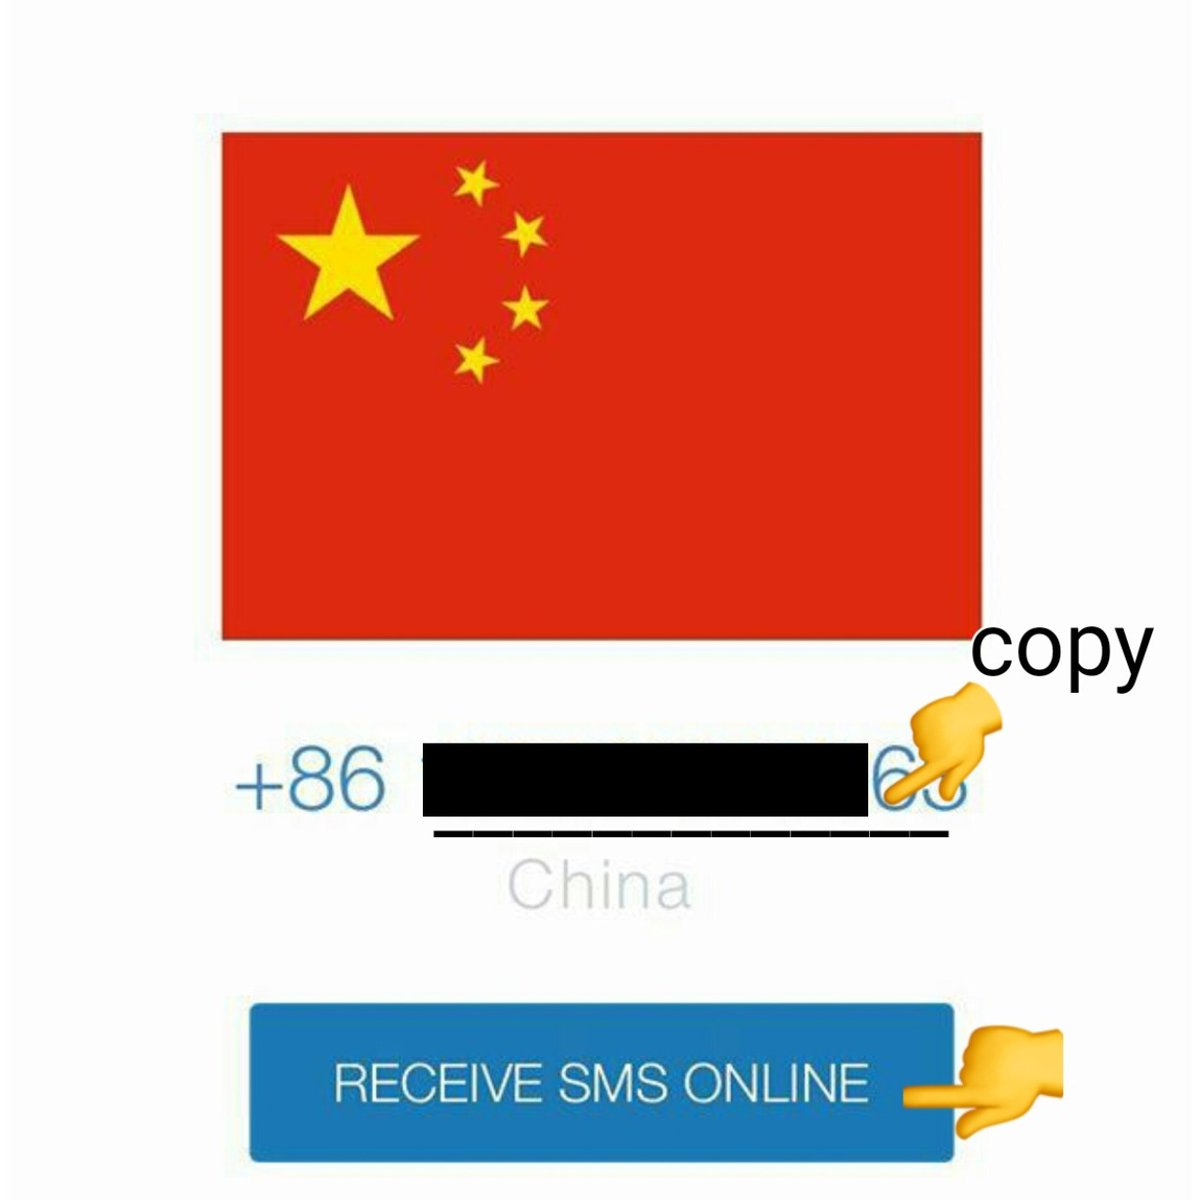 Press on 'RECEIVE SMS ONLINE' then copy the number without the country code ex: china code is +86 (we will paste it later on)